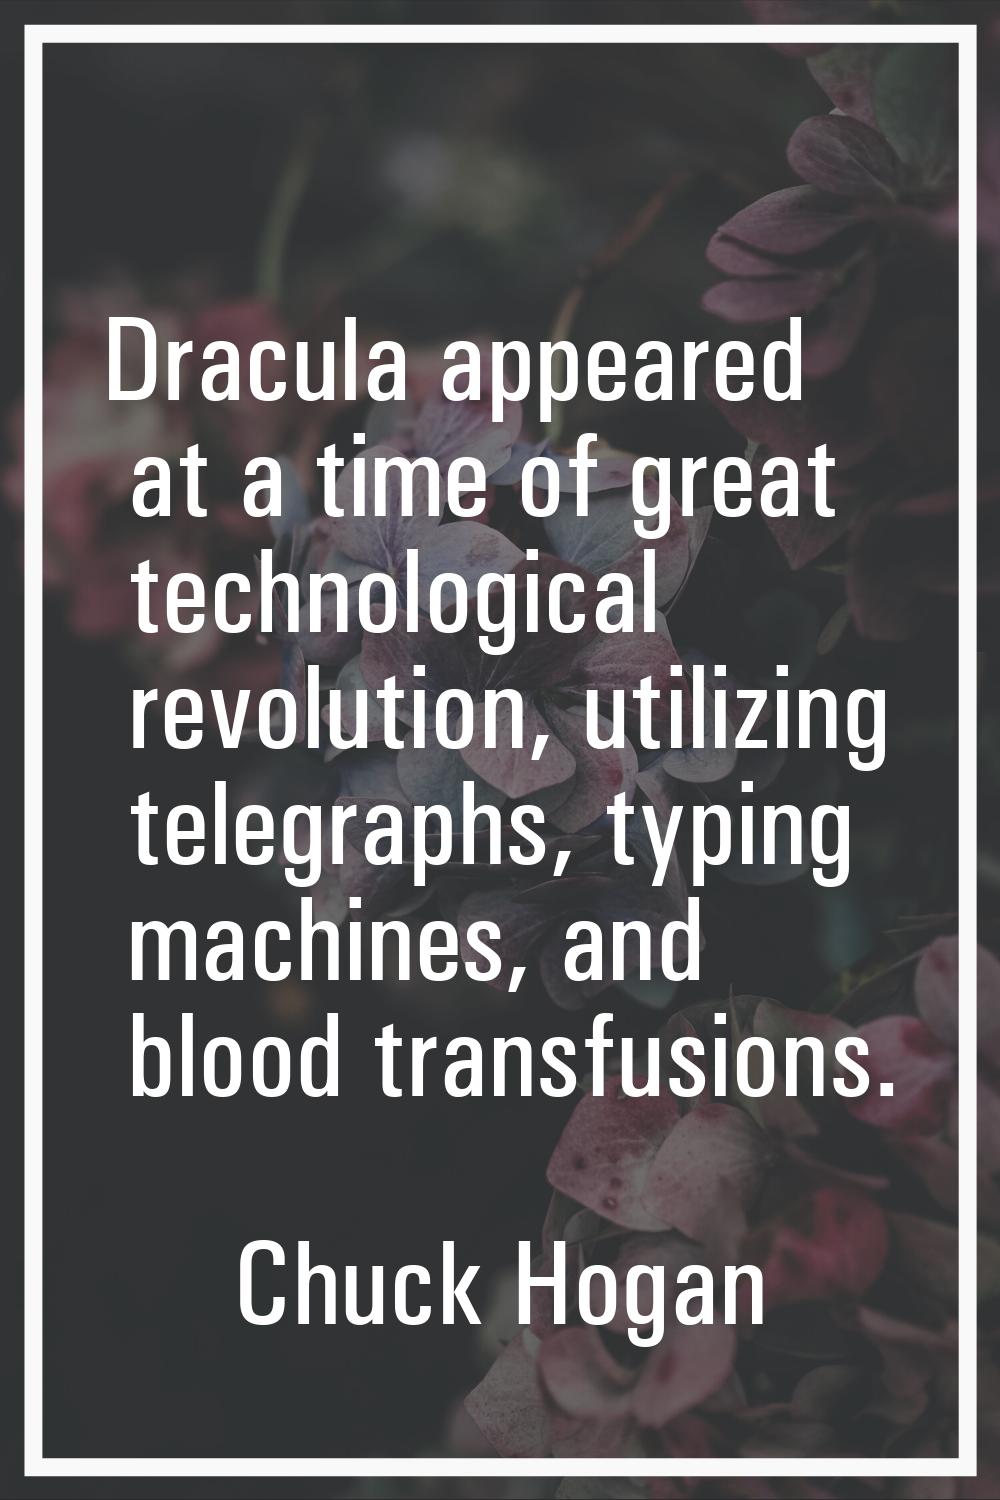 Dracula appeared at a time of great technological revolution, utilizing telegraphs, typing machines